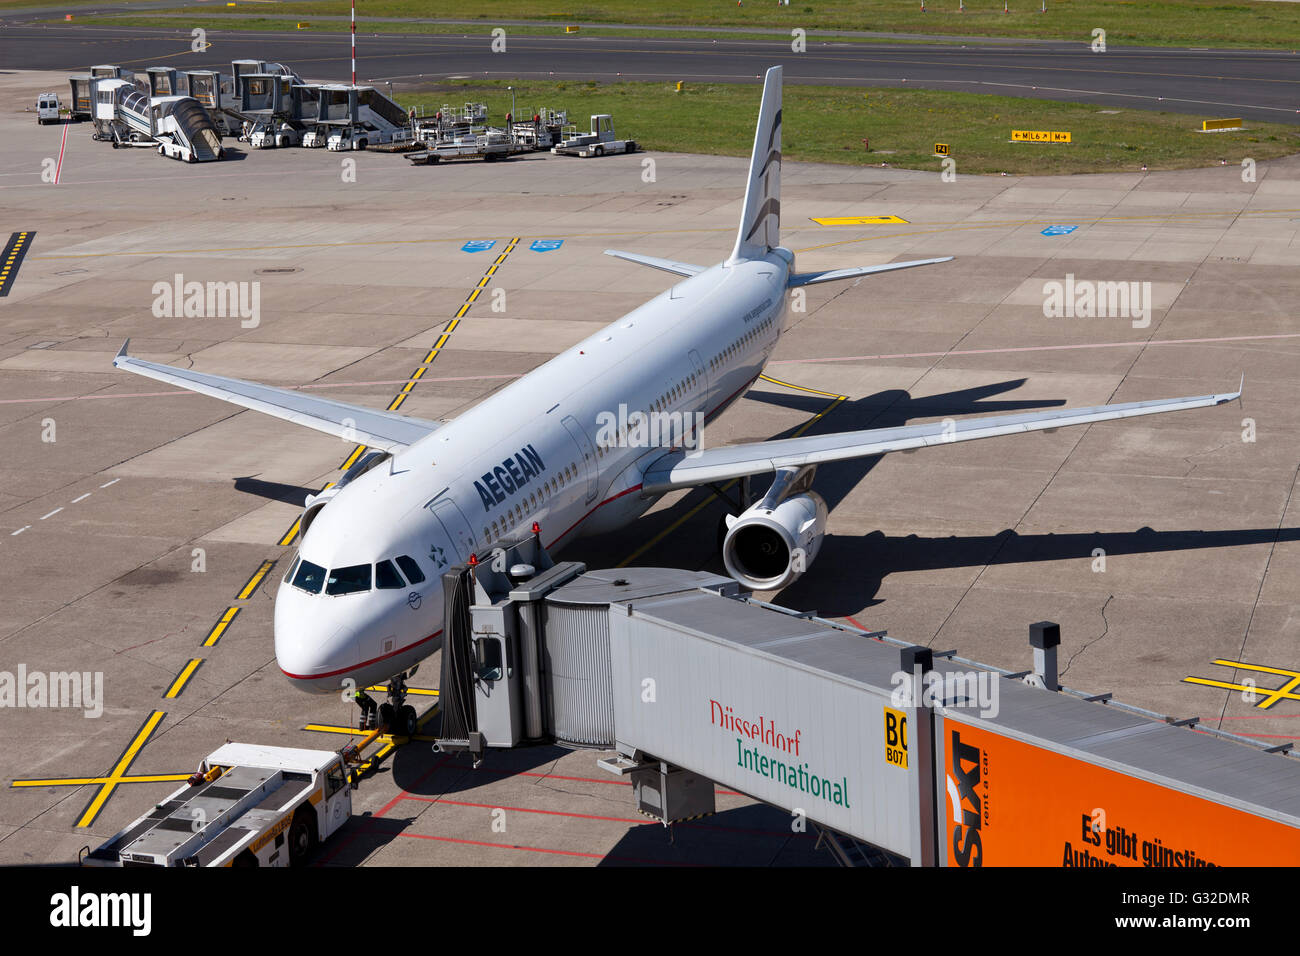 AegeanAir SX-DGA Airbus A 321-232 aircraft being attached to a jetway or passenger boarding bridge on the airport apron, Stock Photo